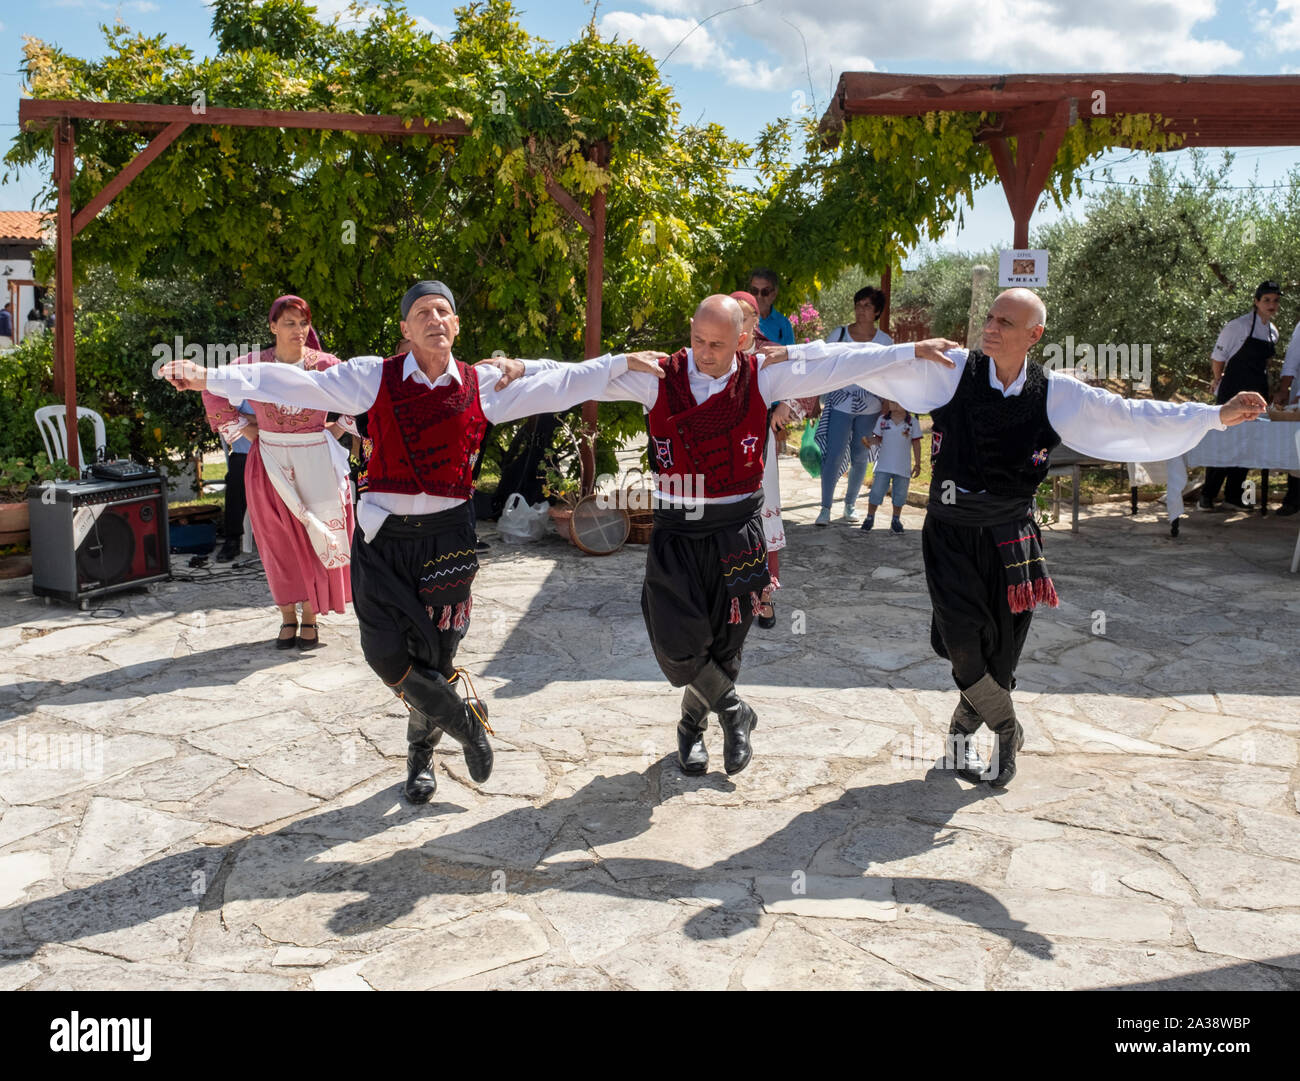 Dancers performing chypriote en costumes traditionnels à l'Olive, Anogyra Oleastro Festival, Chypre. Banque D'Images